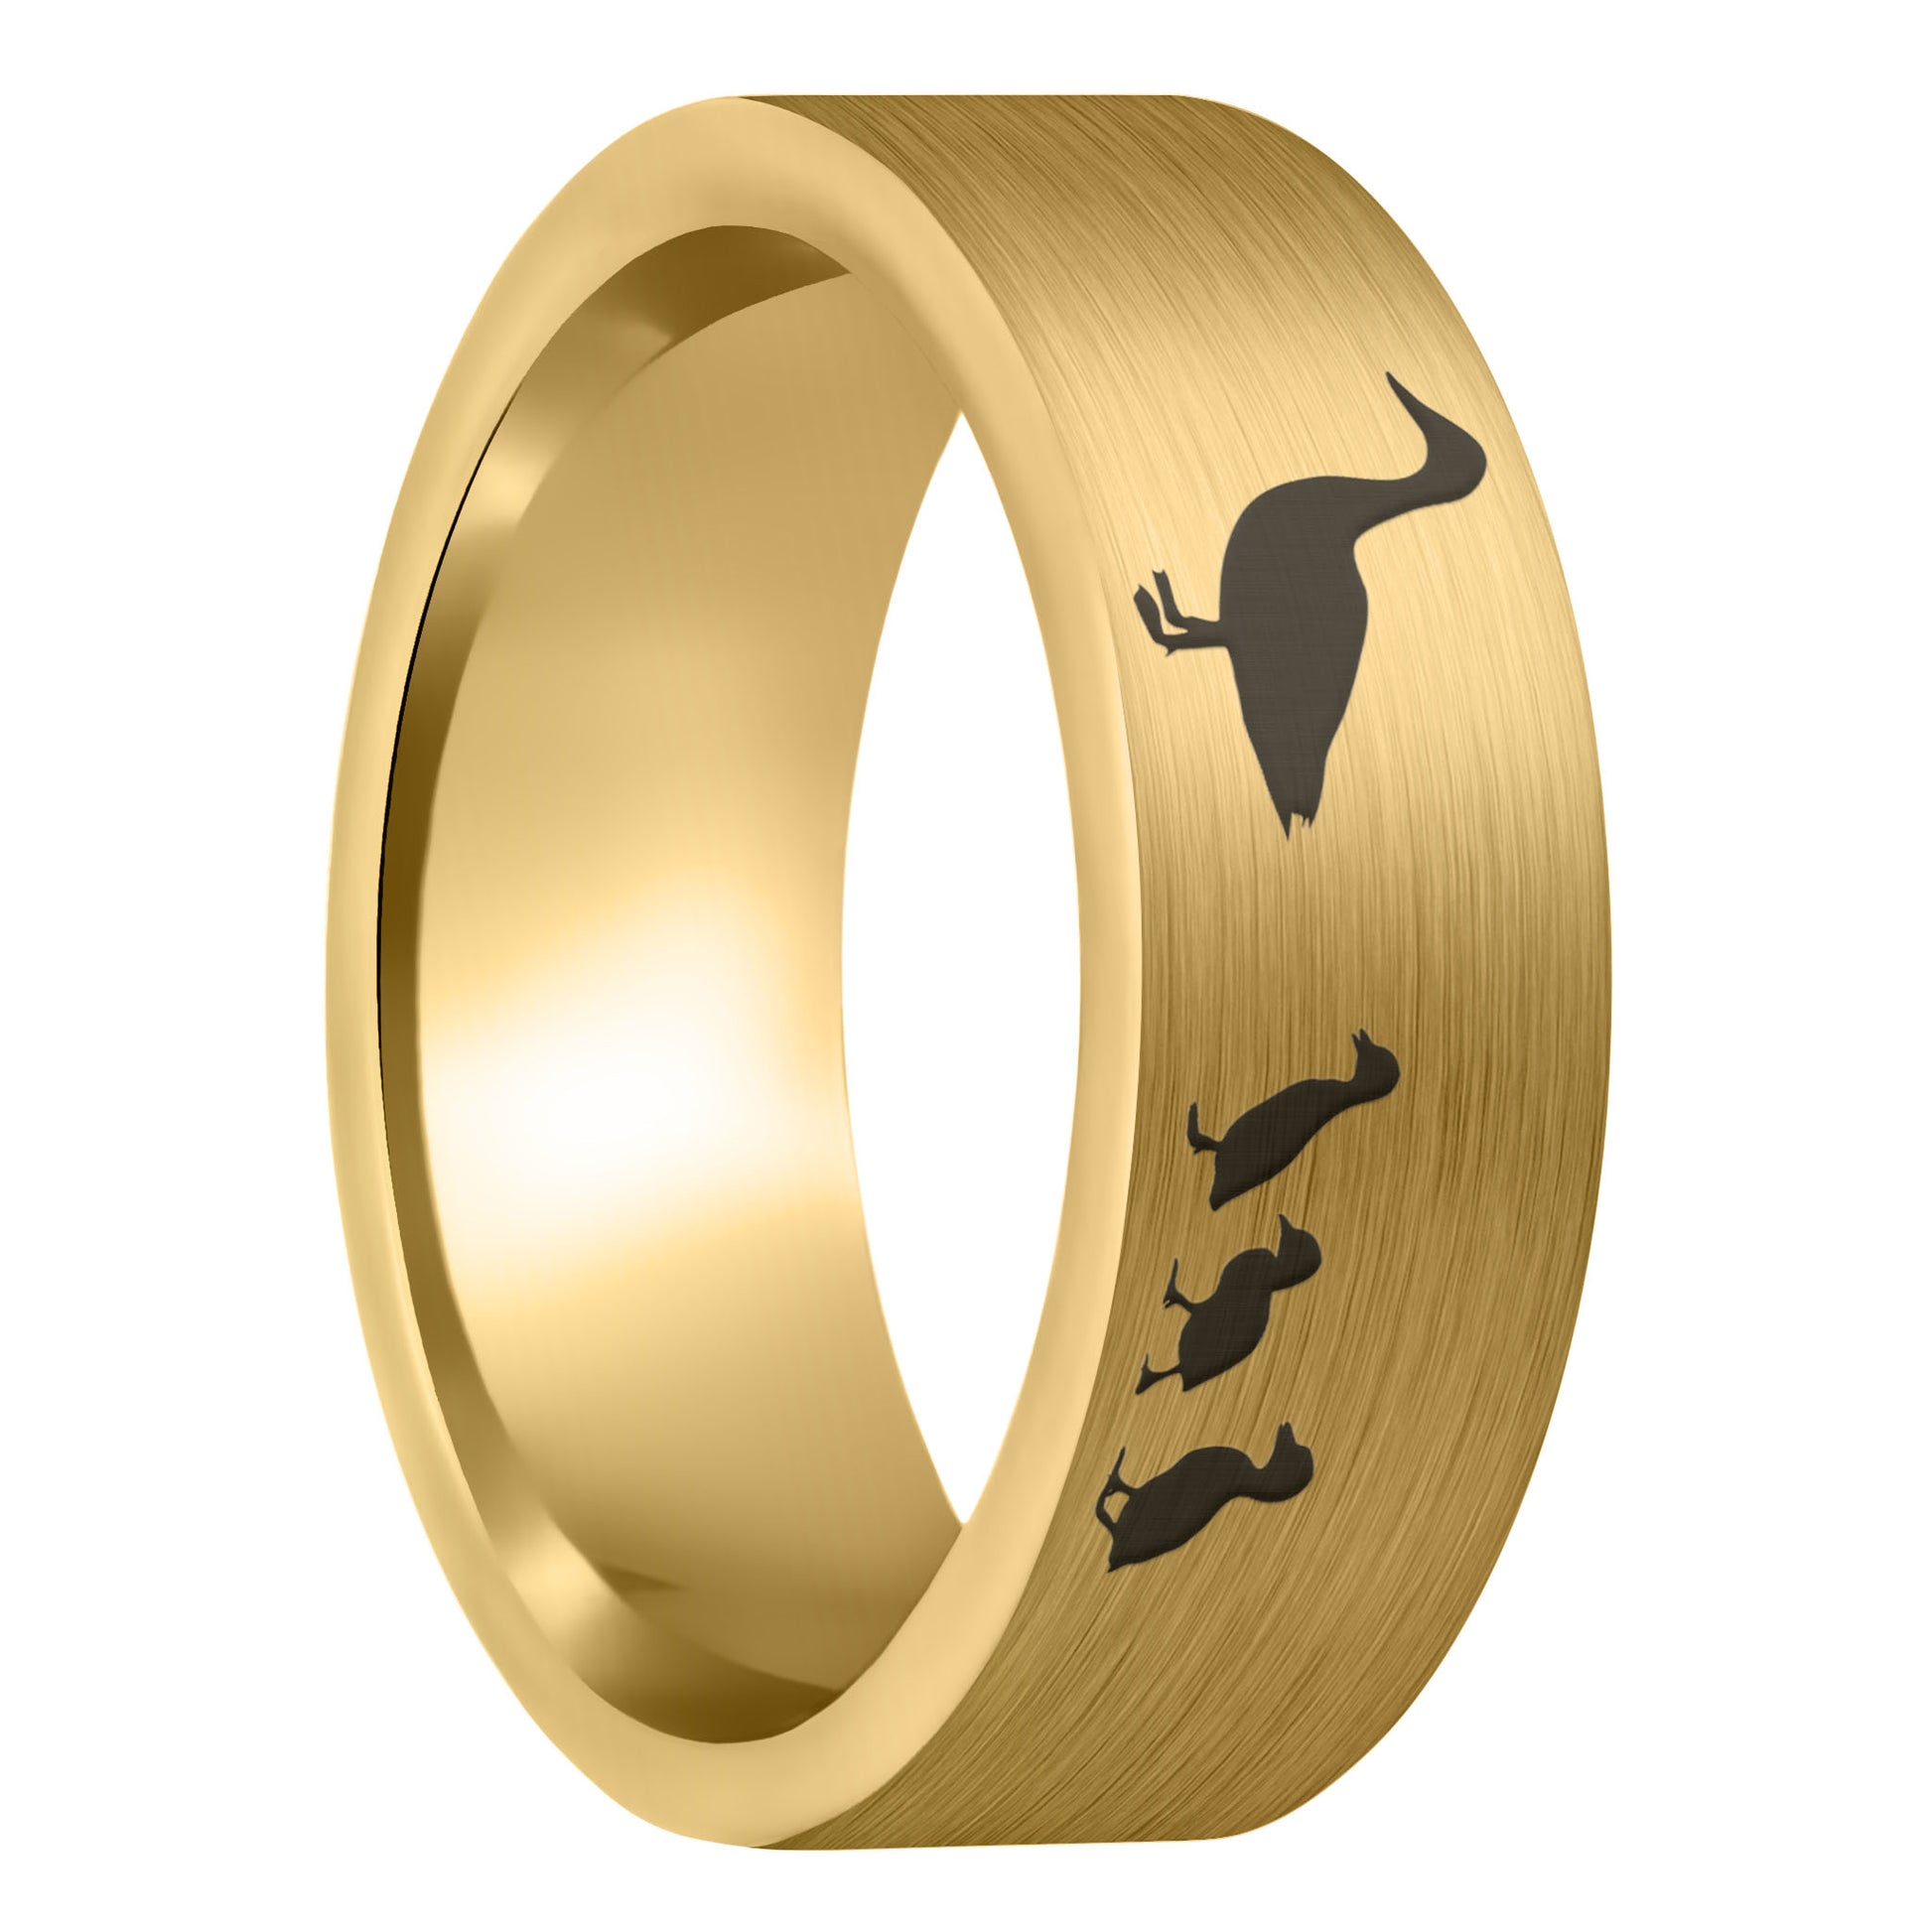 A duck ducklings brushed gold tungsten men's wedding band displayed on a plain white background.